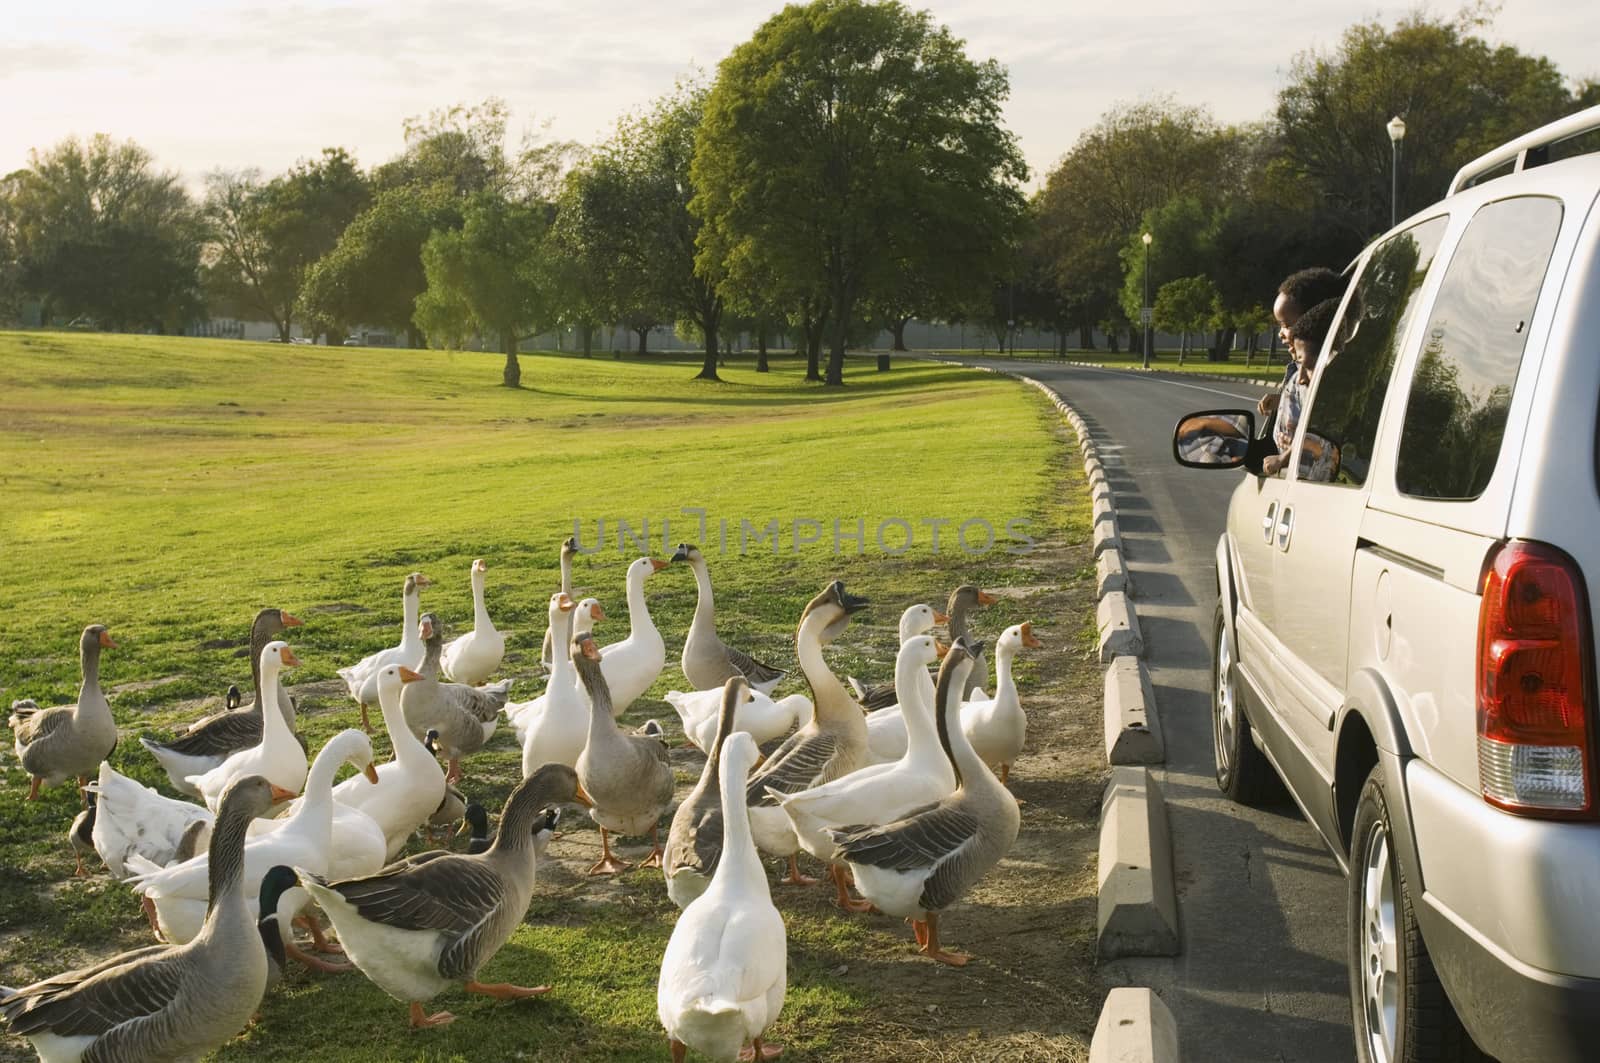 Father and son peeping out of car window to look at the flock of white geese by moodboard